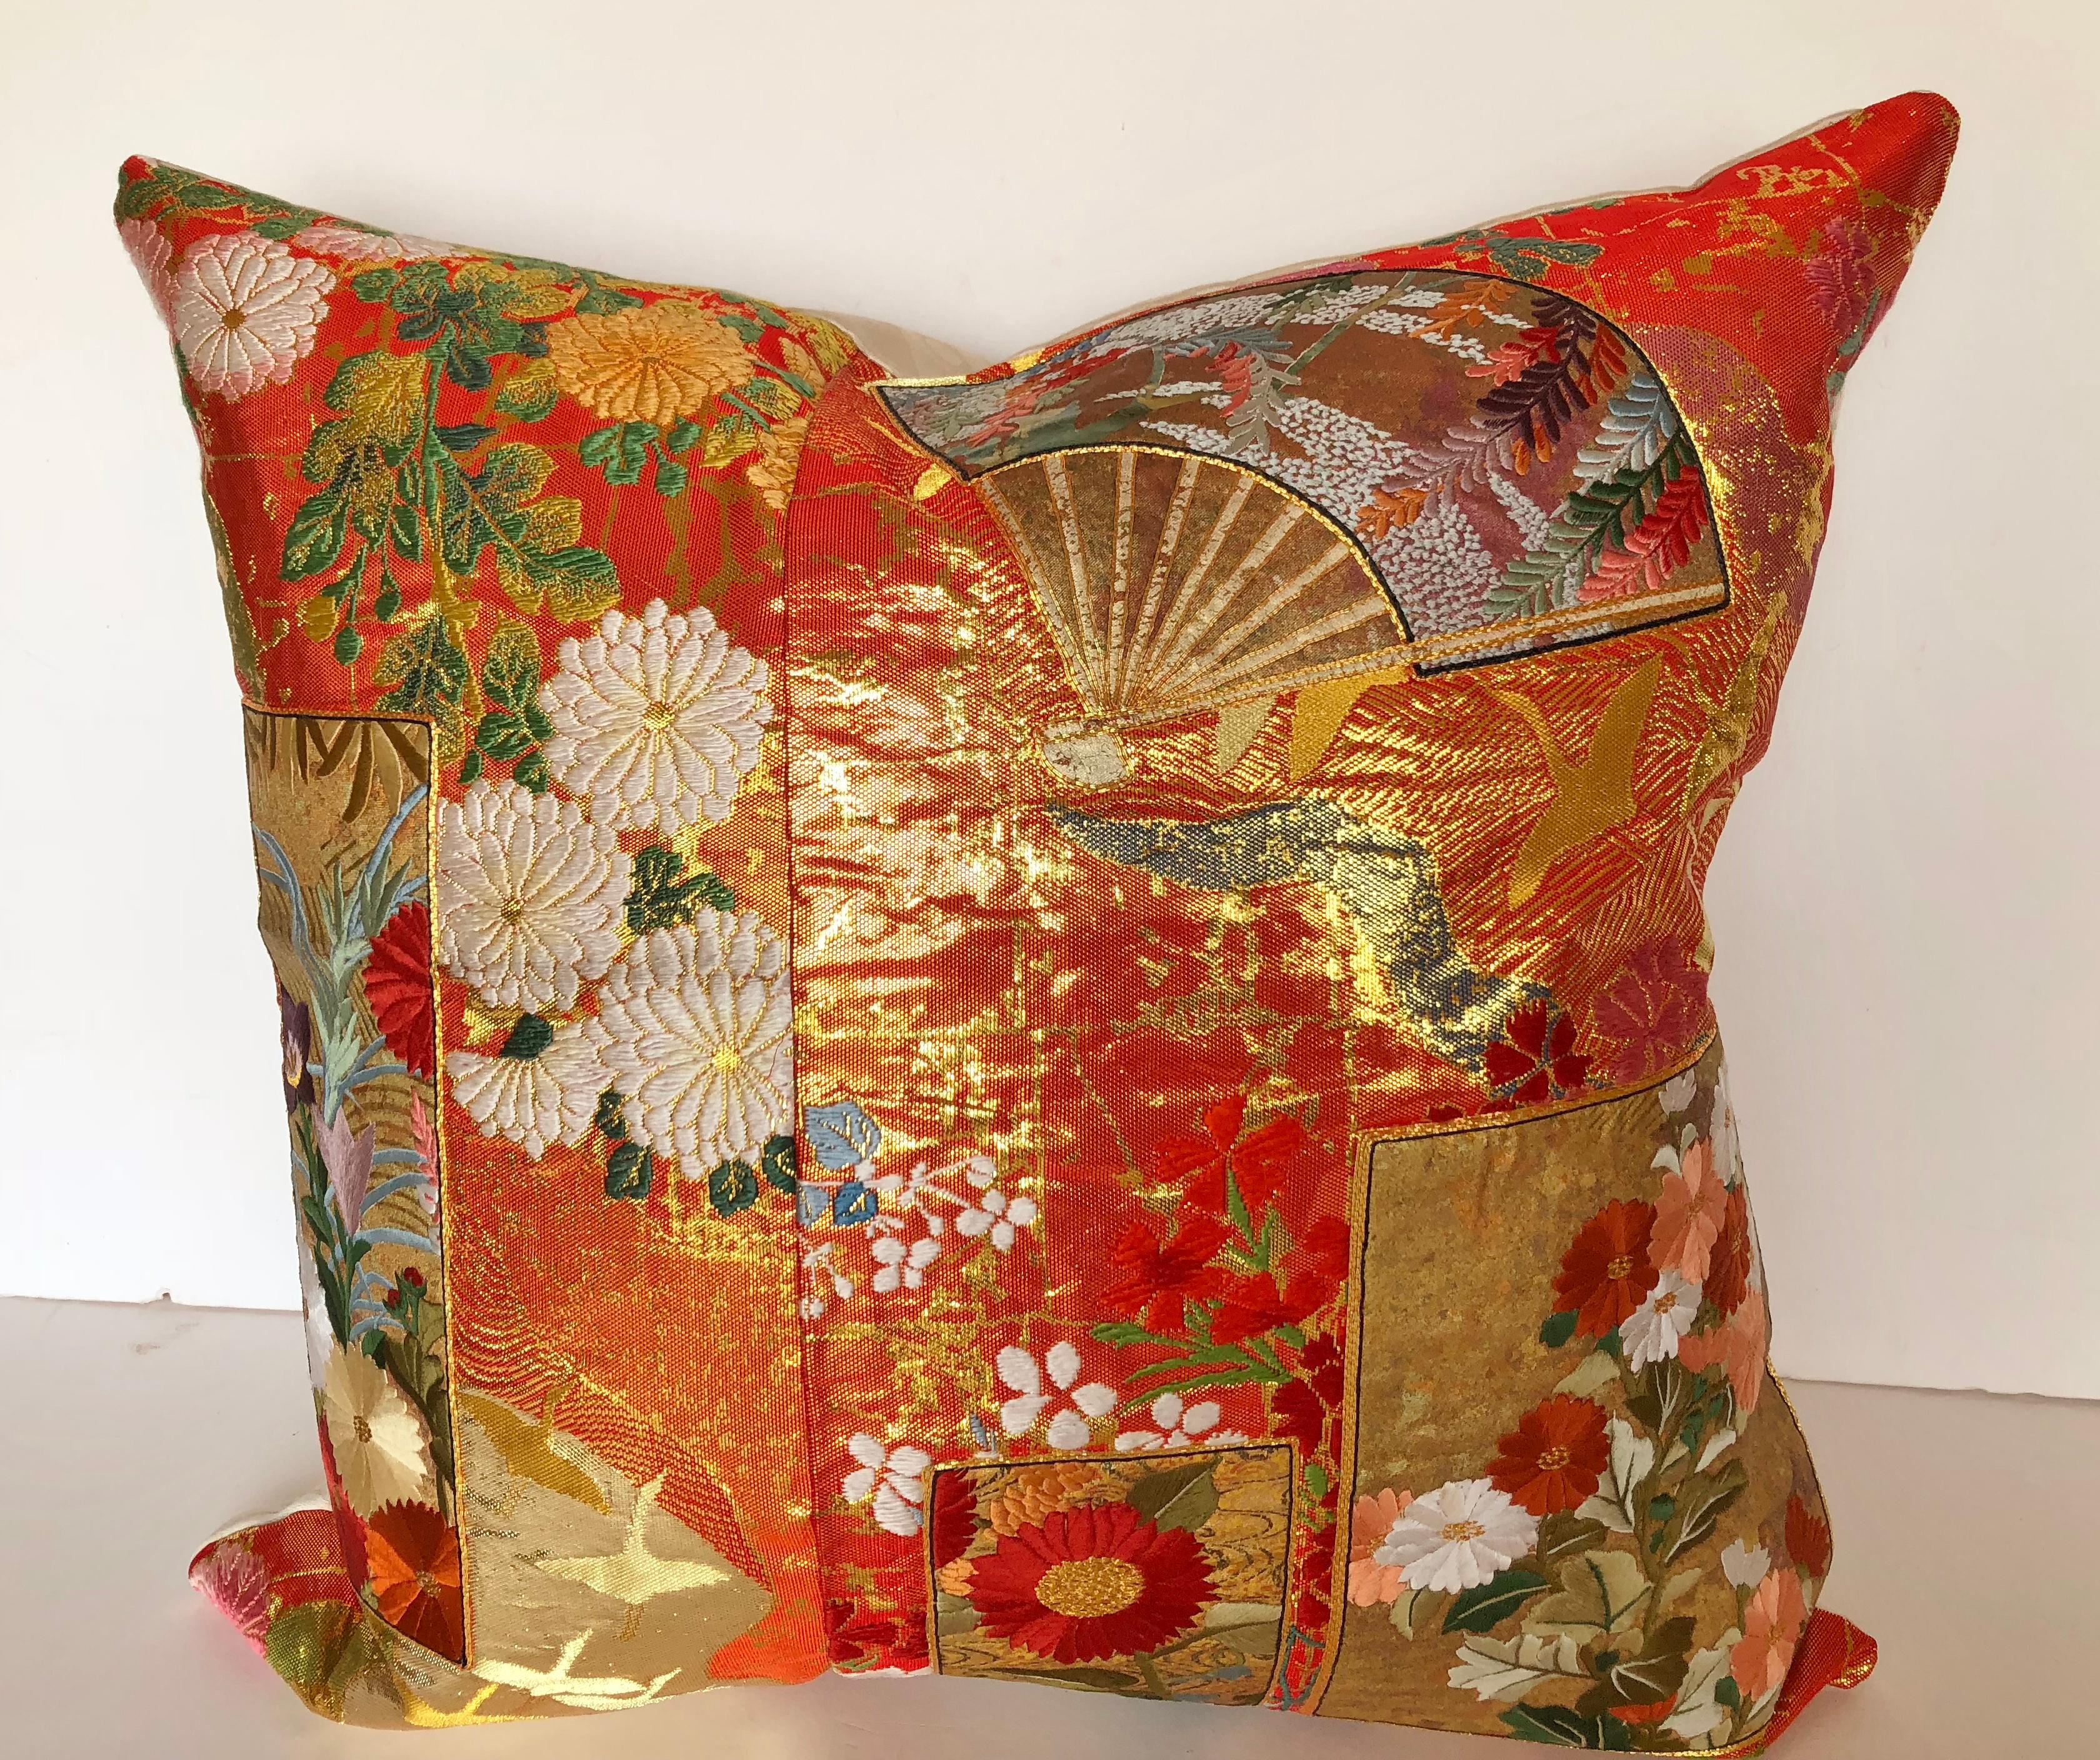 Custom pillow cut from a vintage silk Japanese Uchikake, the traditional wedding kimono. The background of the textile has the traditional design of florals and birds with silk and metallic threads. Embroidered silk appliques with fans and florals